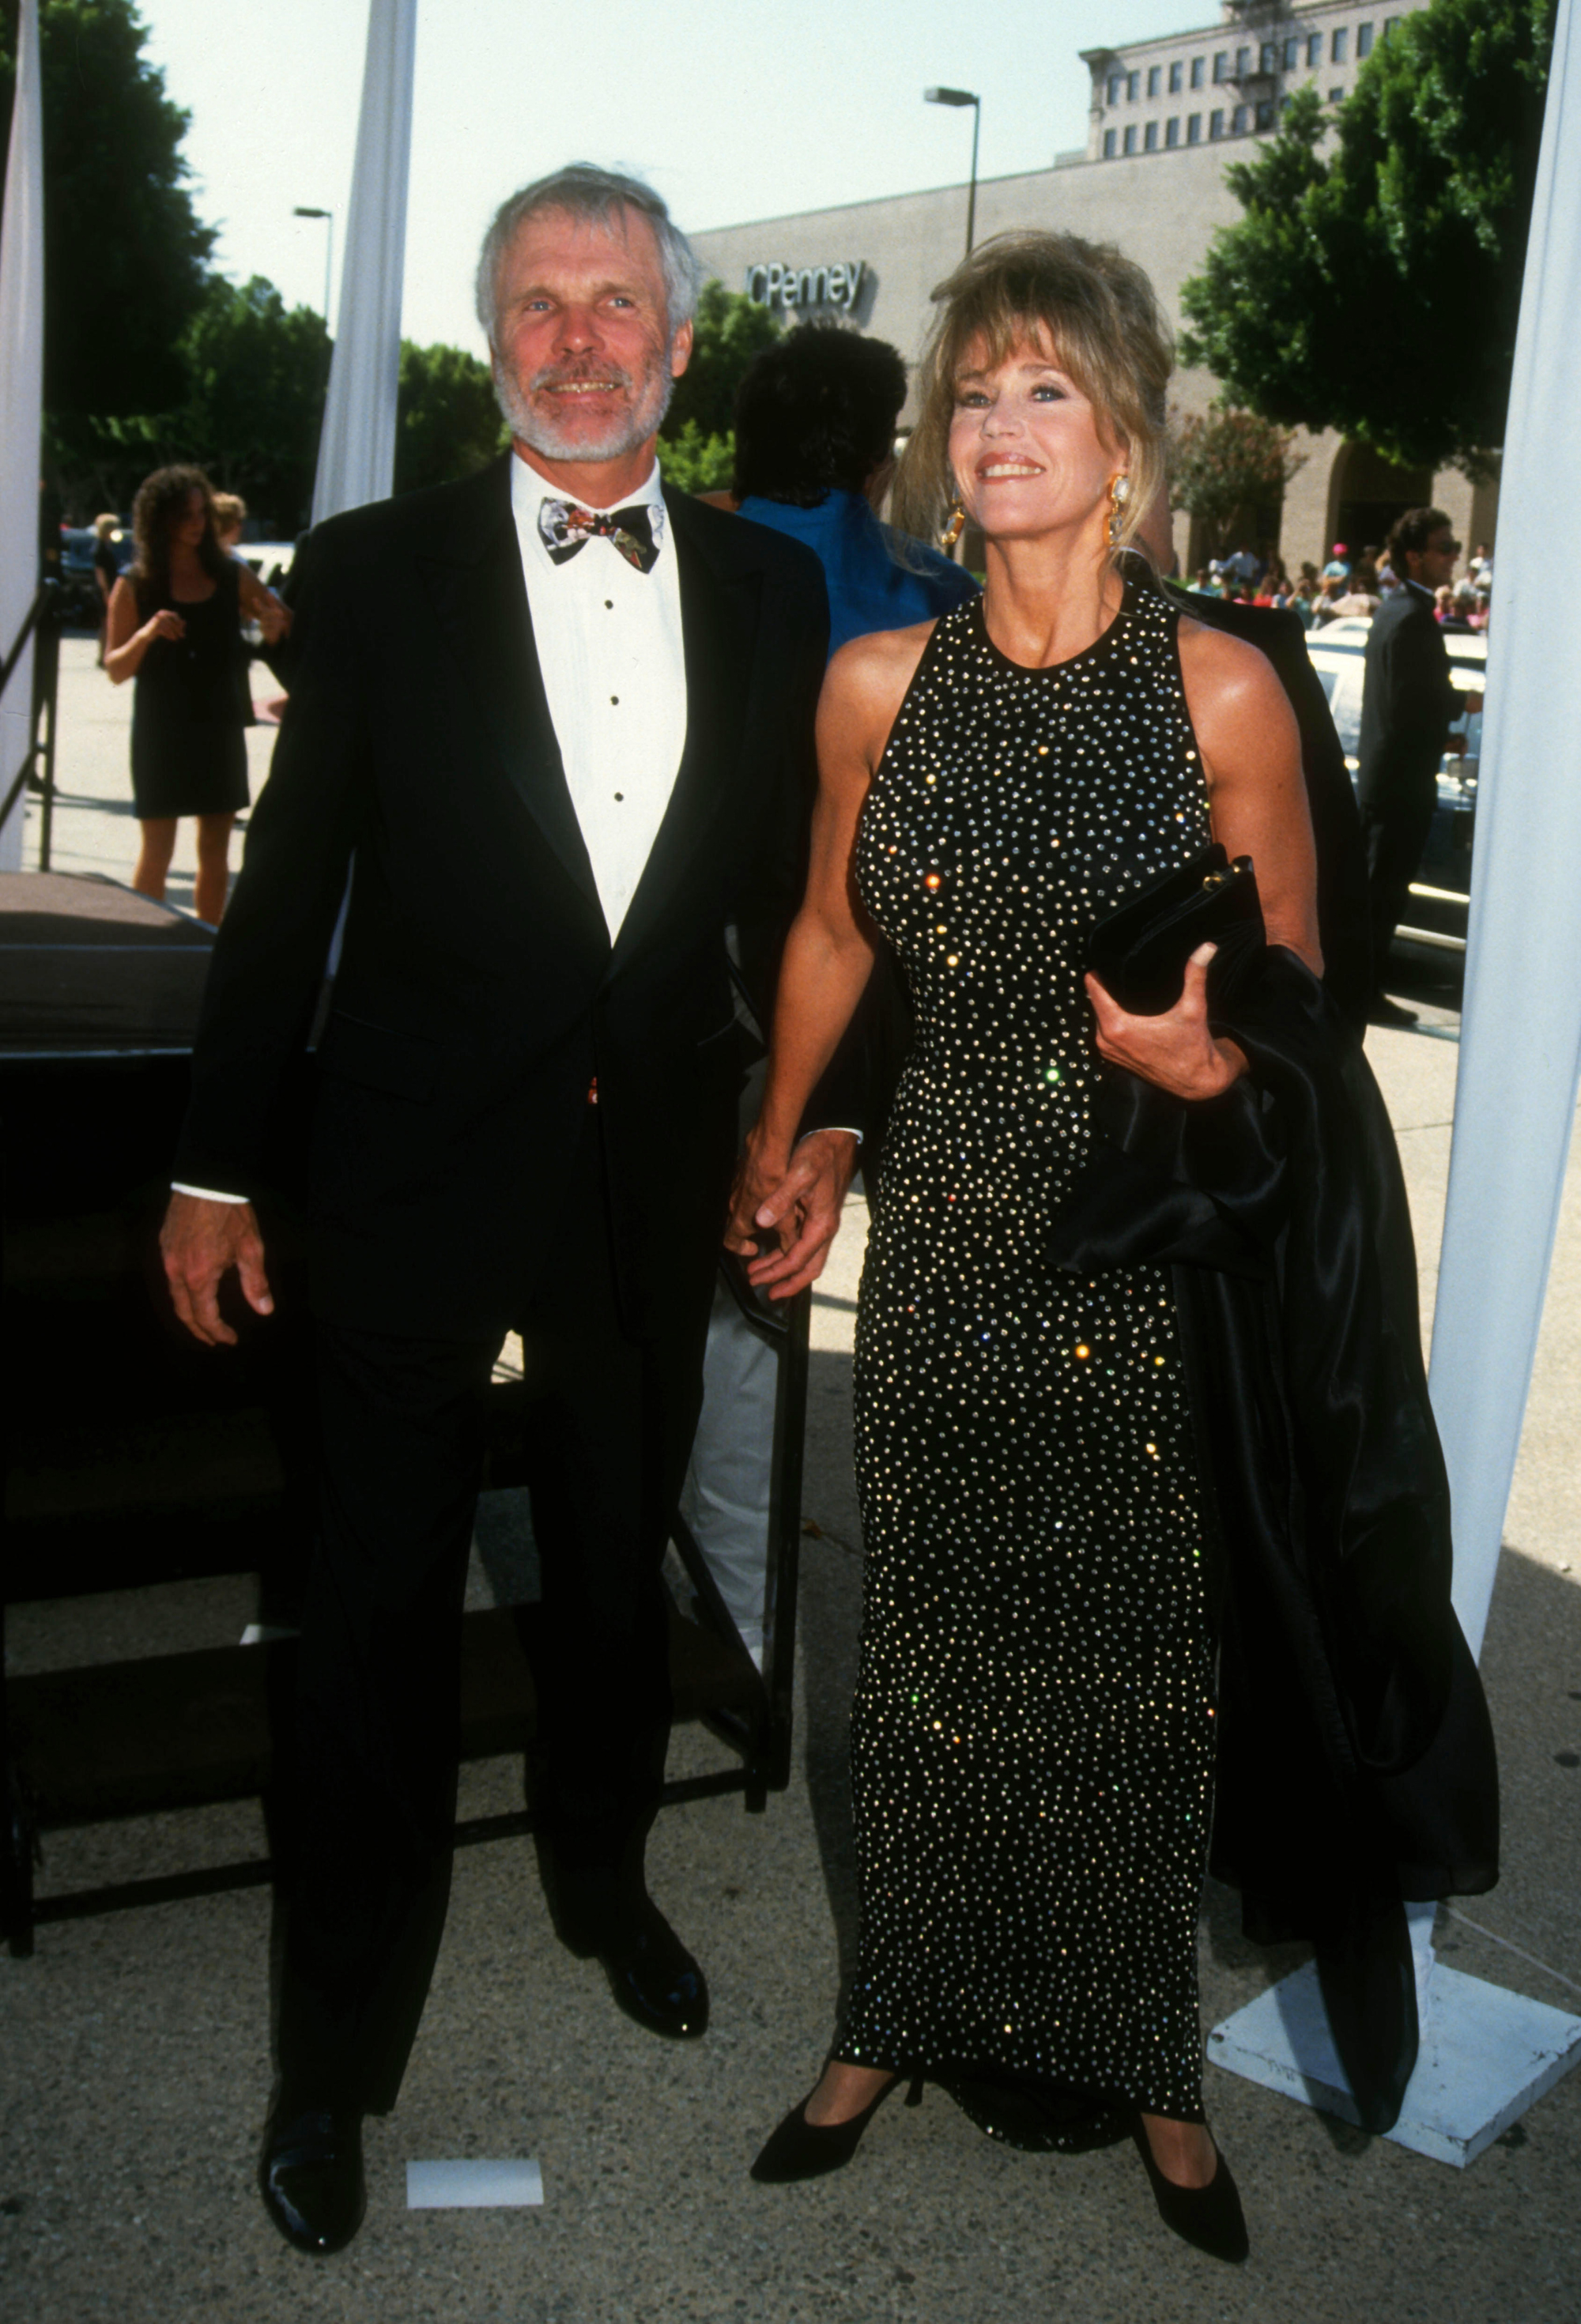 Ted Turner and Jane Fonda attend the 44th Annual Primetime Emmy Awards